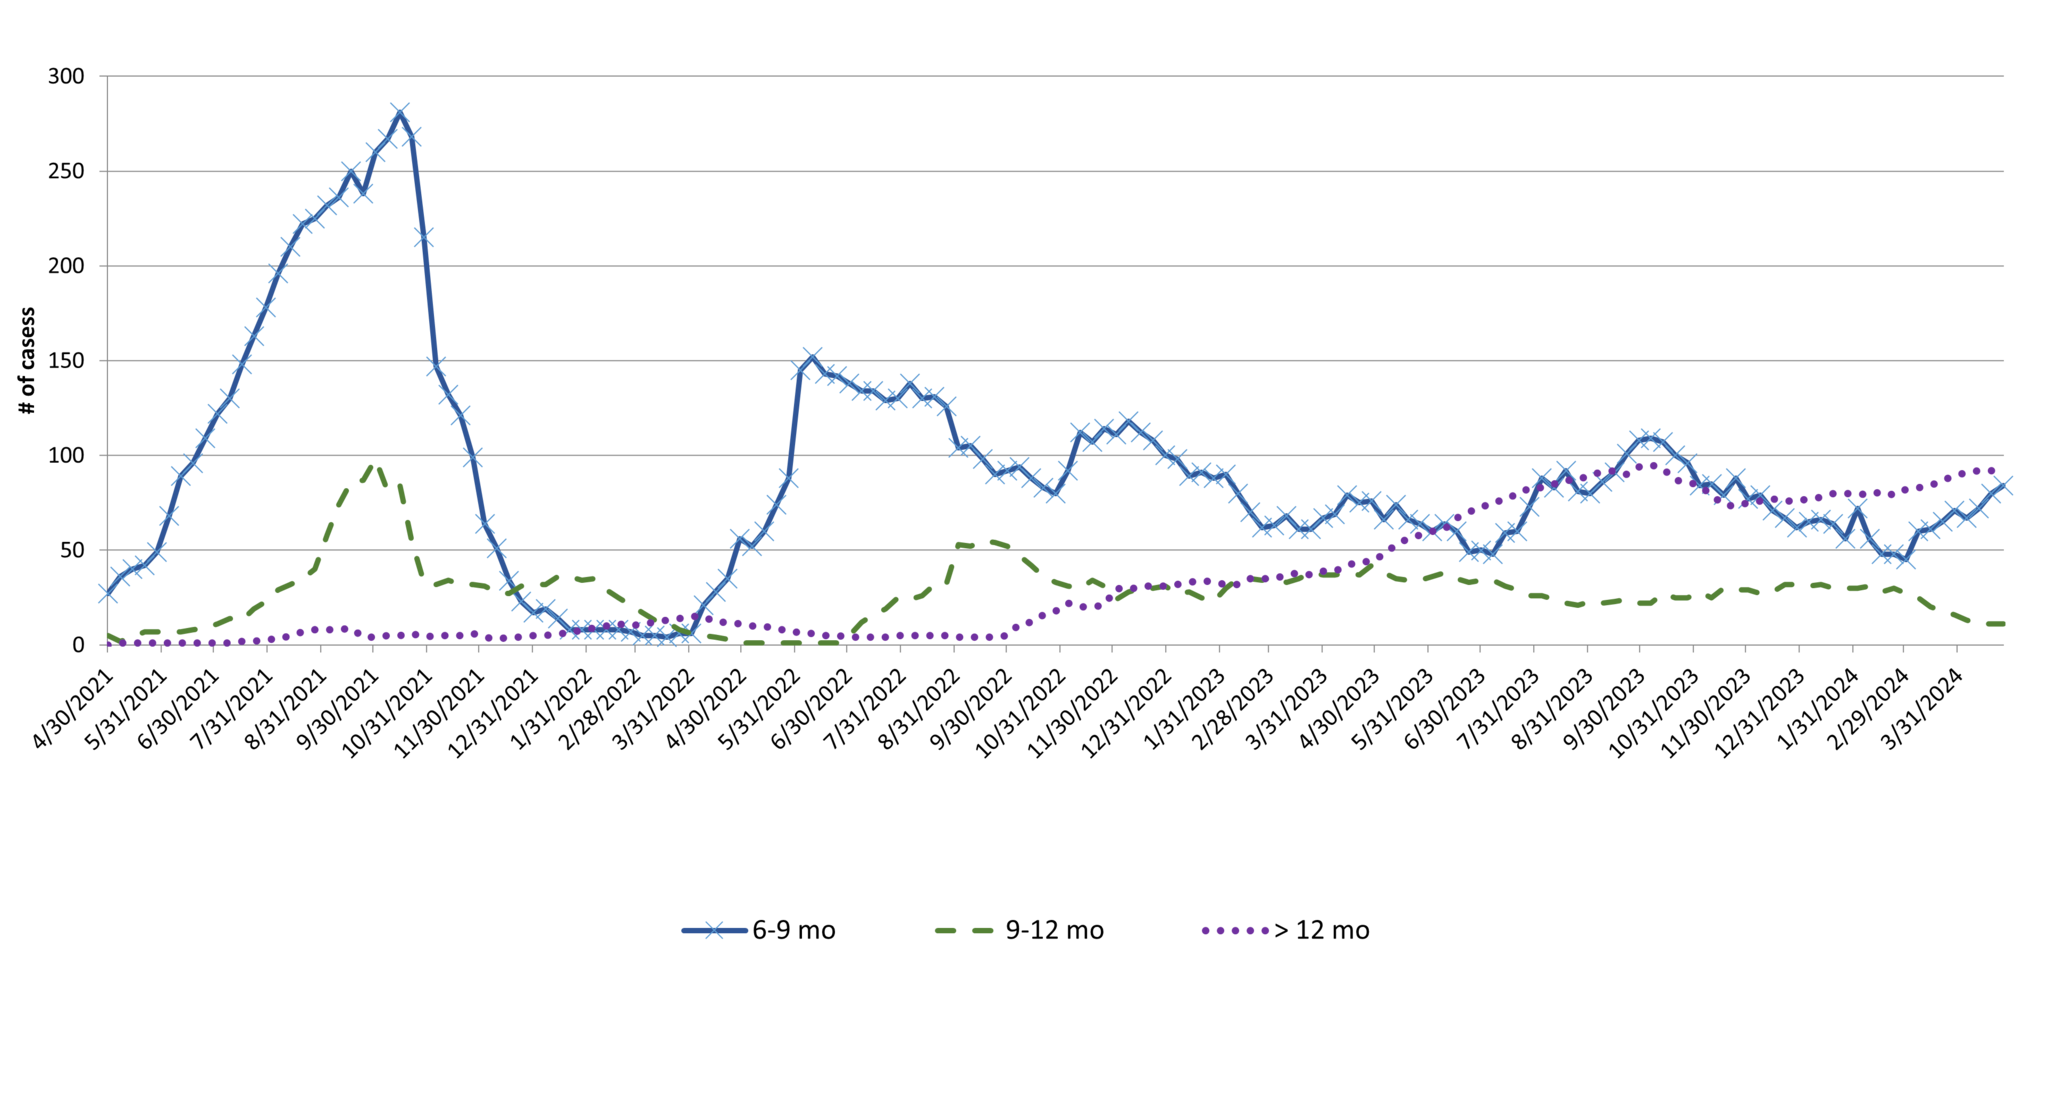 Graph showing the age of cases since the pause began in May of 2021. The age of cases increased significantly in May and peaked in October of 2021. The processes in place now continue to reduce the age of cases.